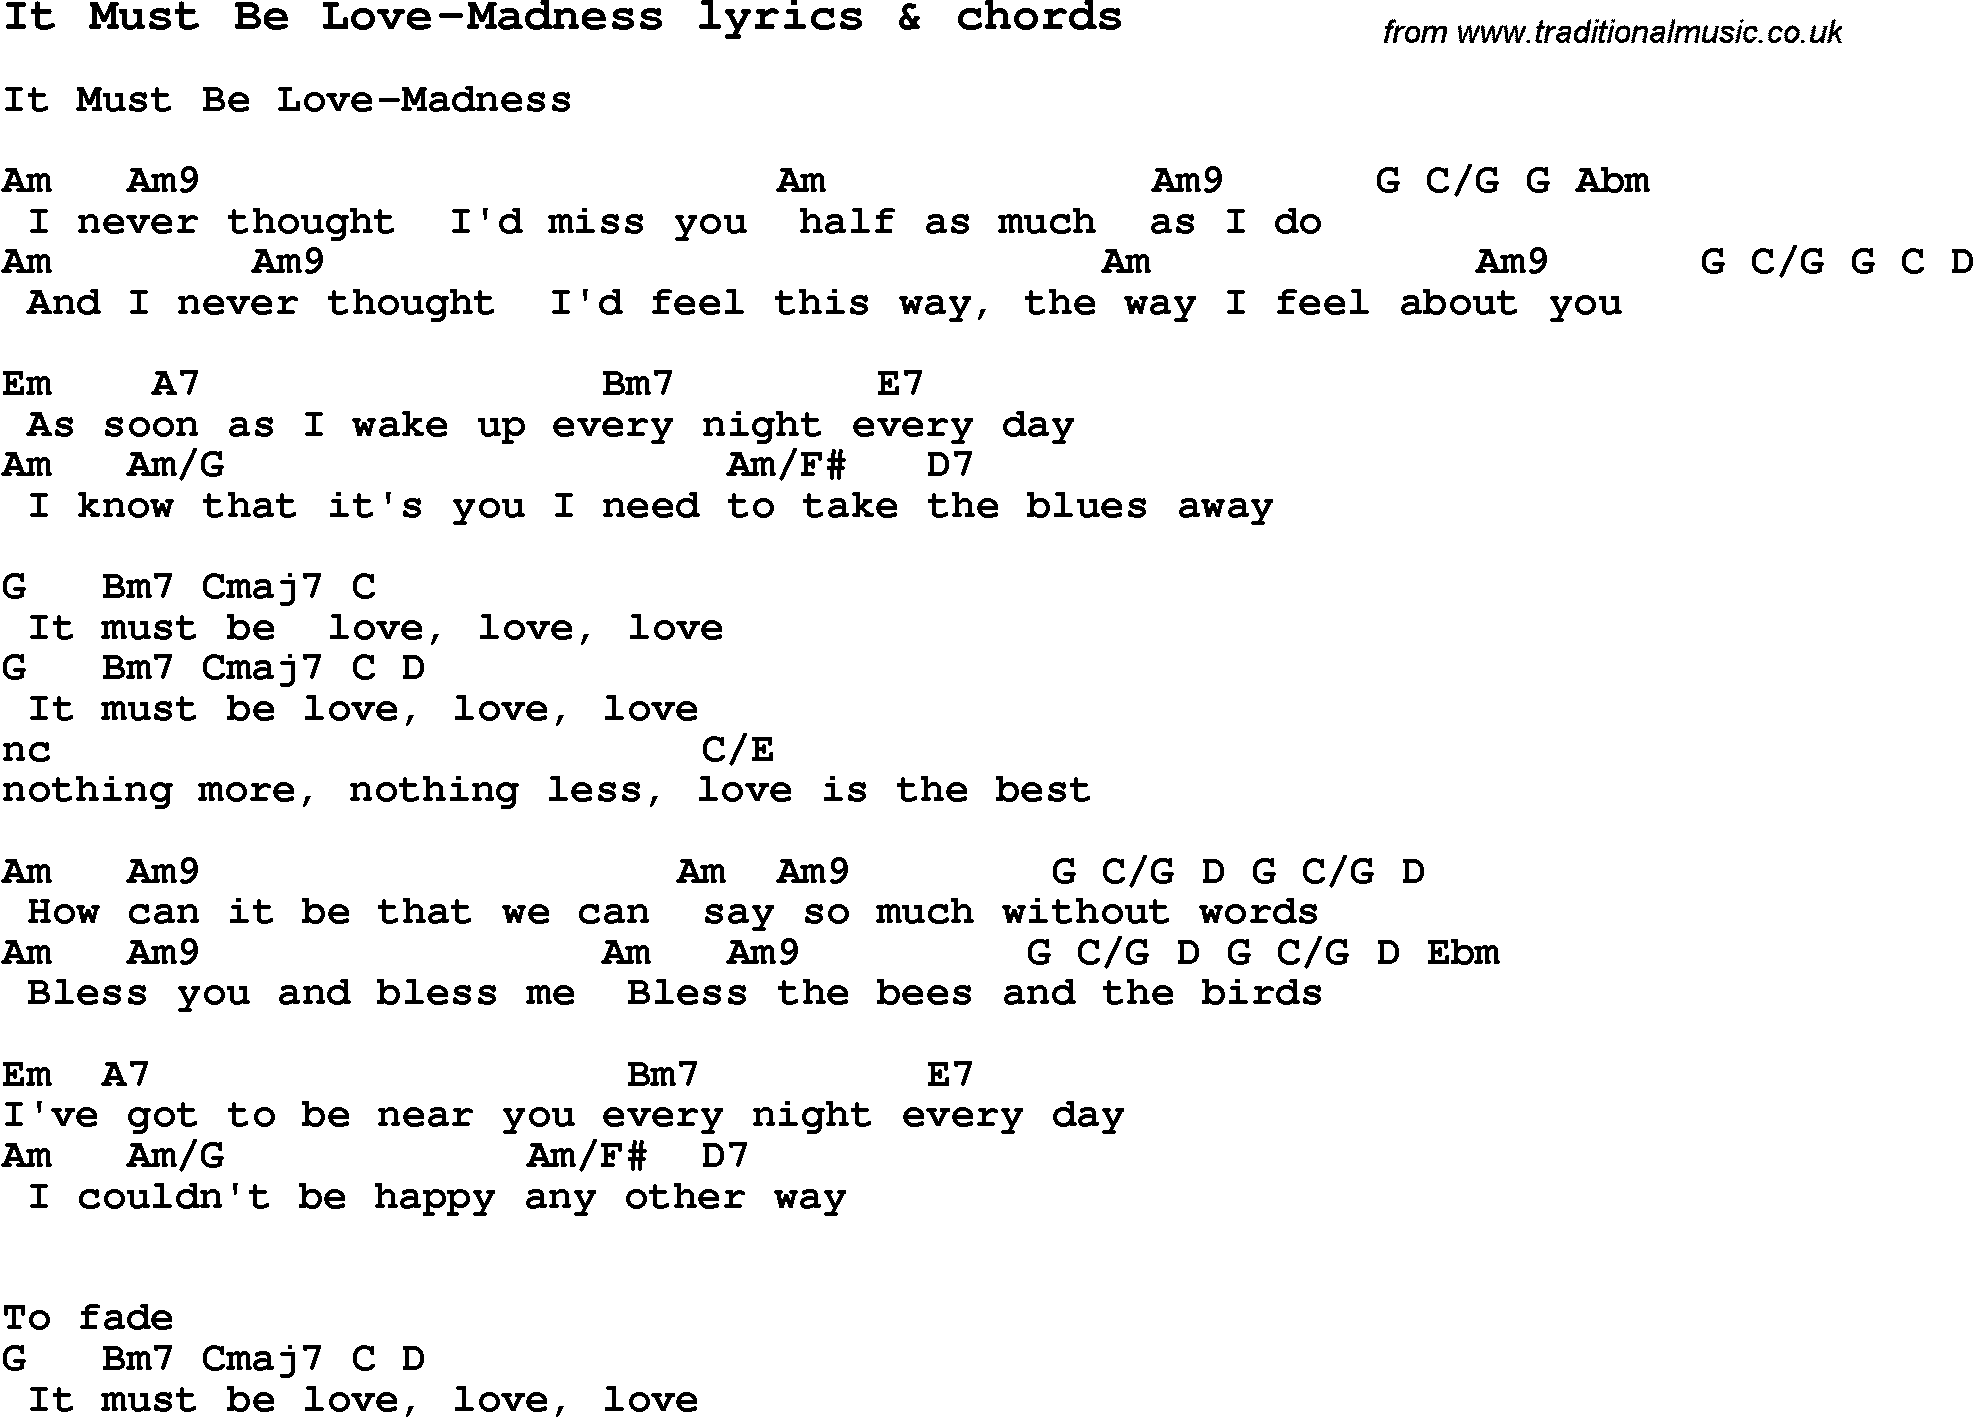 Love Song Lyrics for: It Must Be Love-Madness with chords for Ukulele, Guitar Banjo etc.